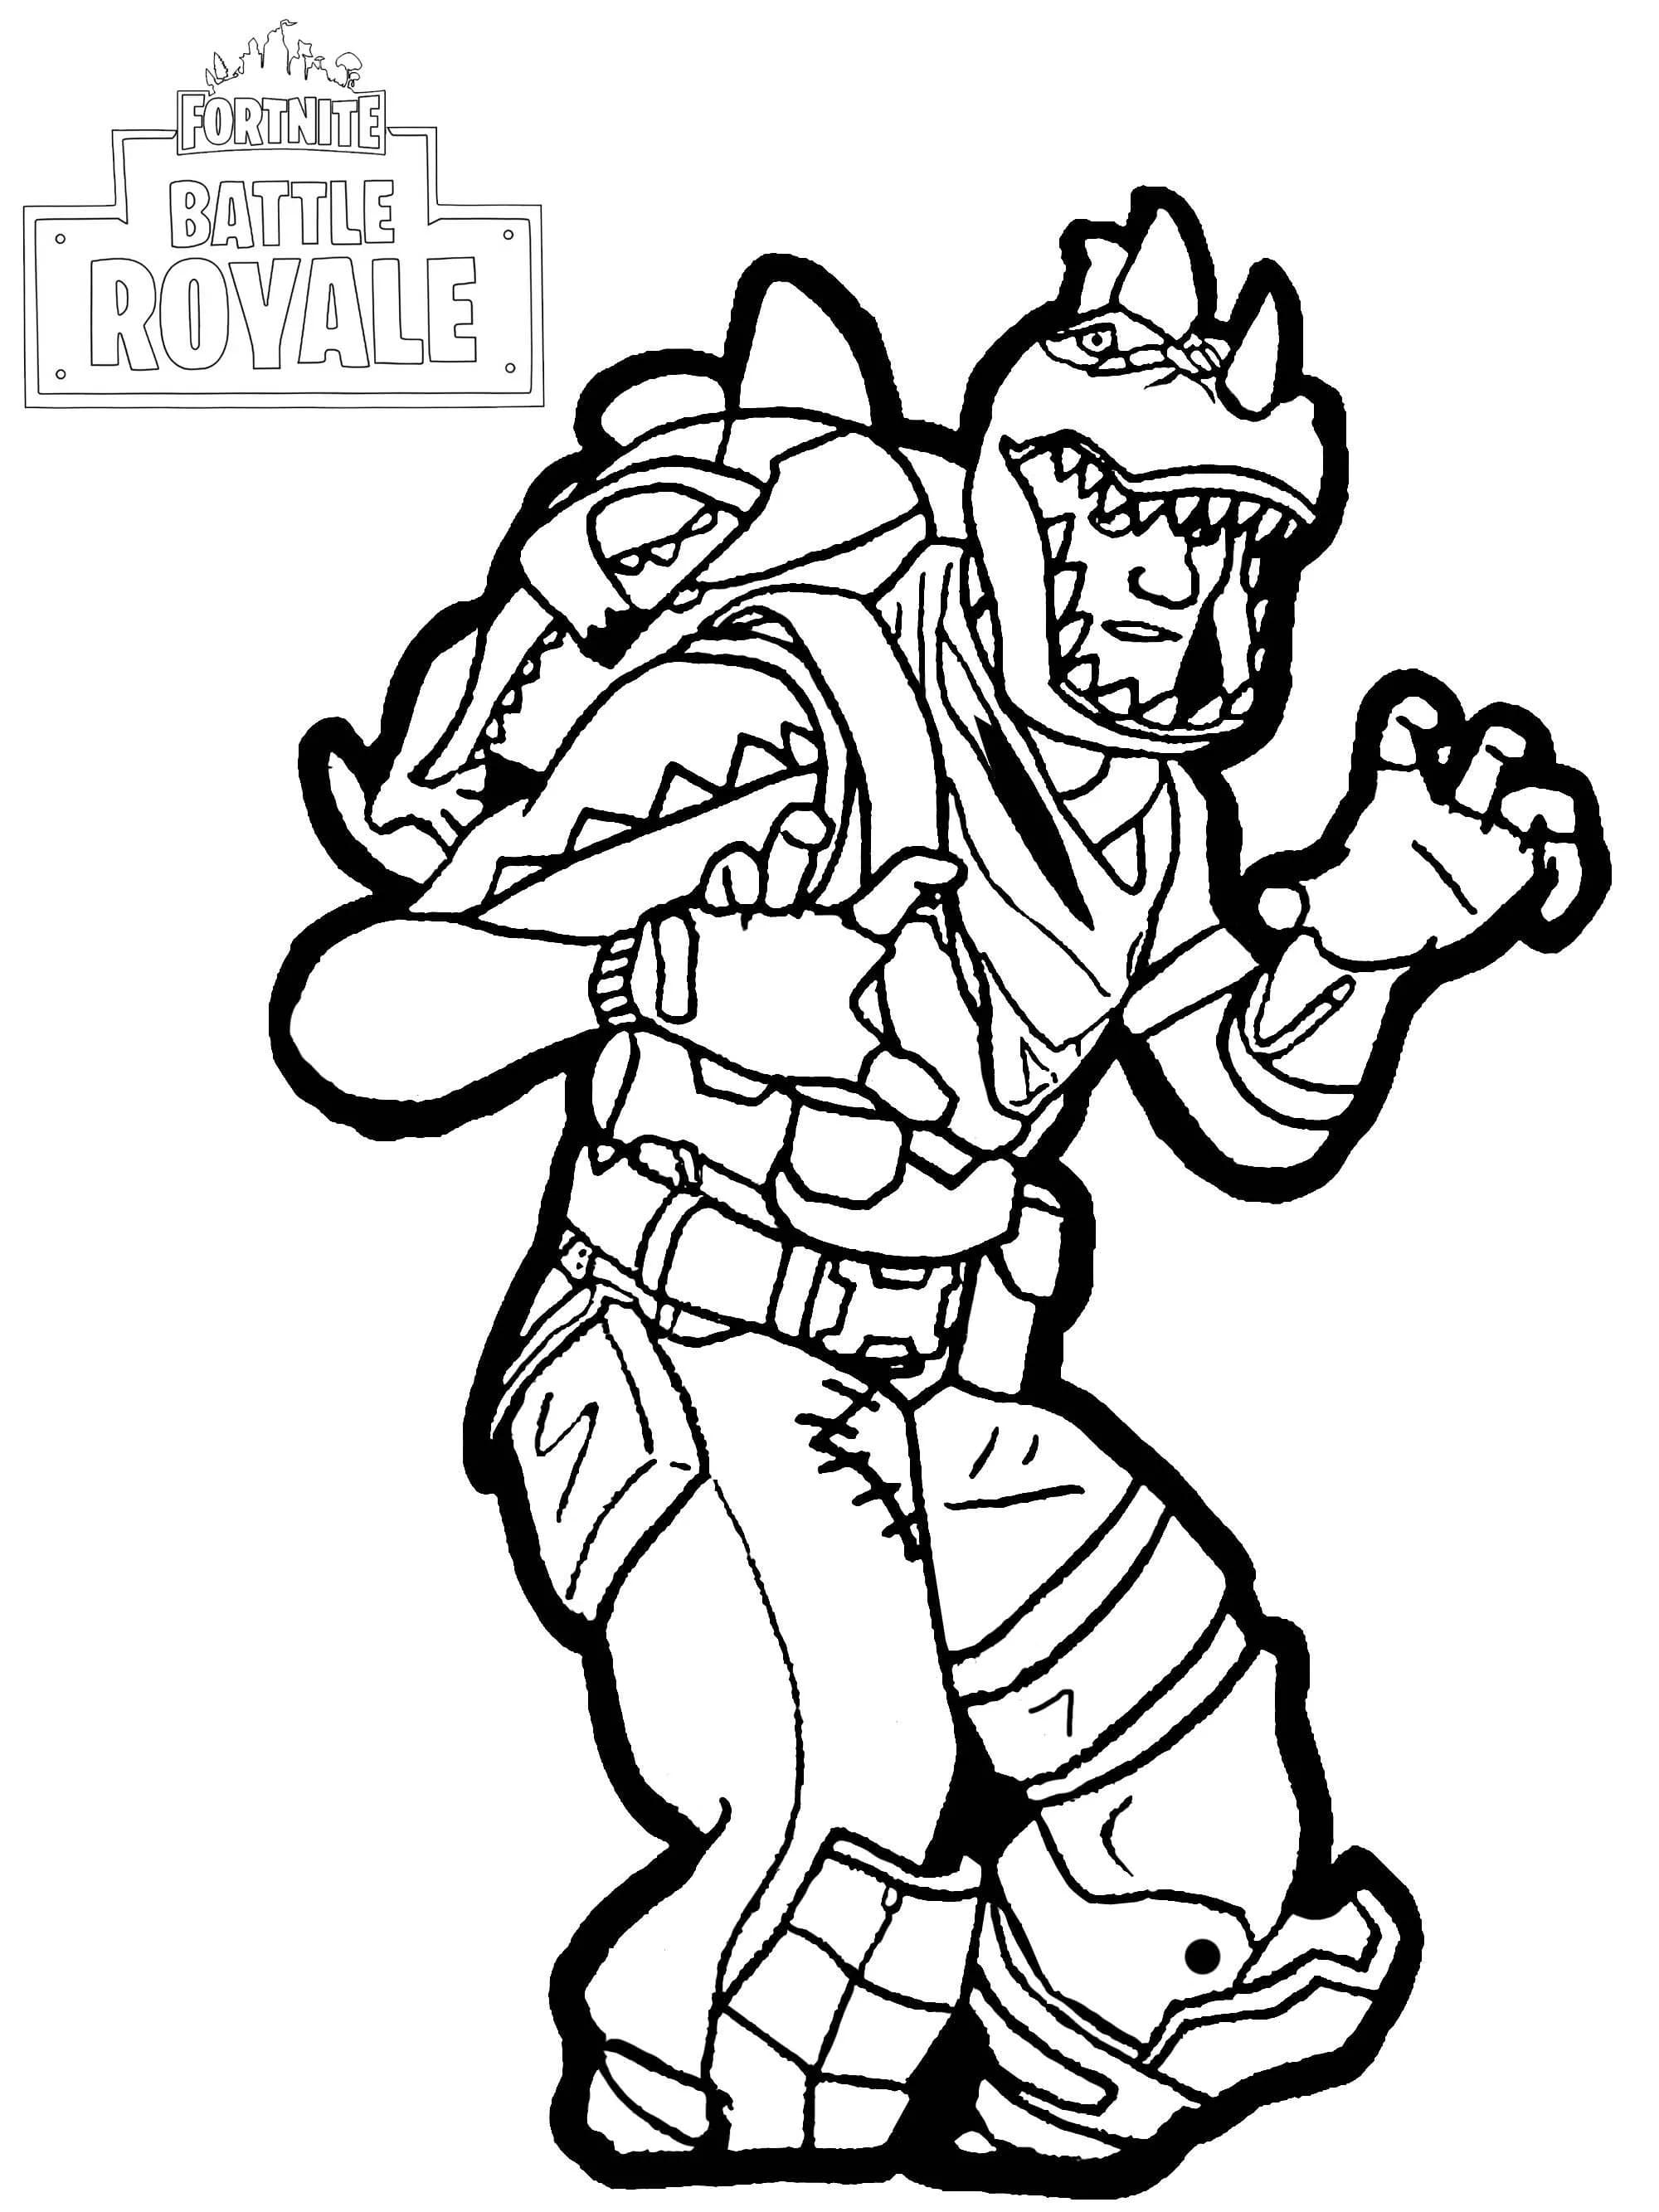 fortnite logo coloring page